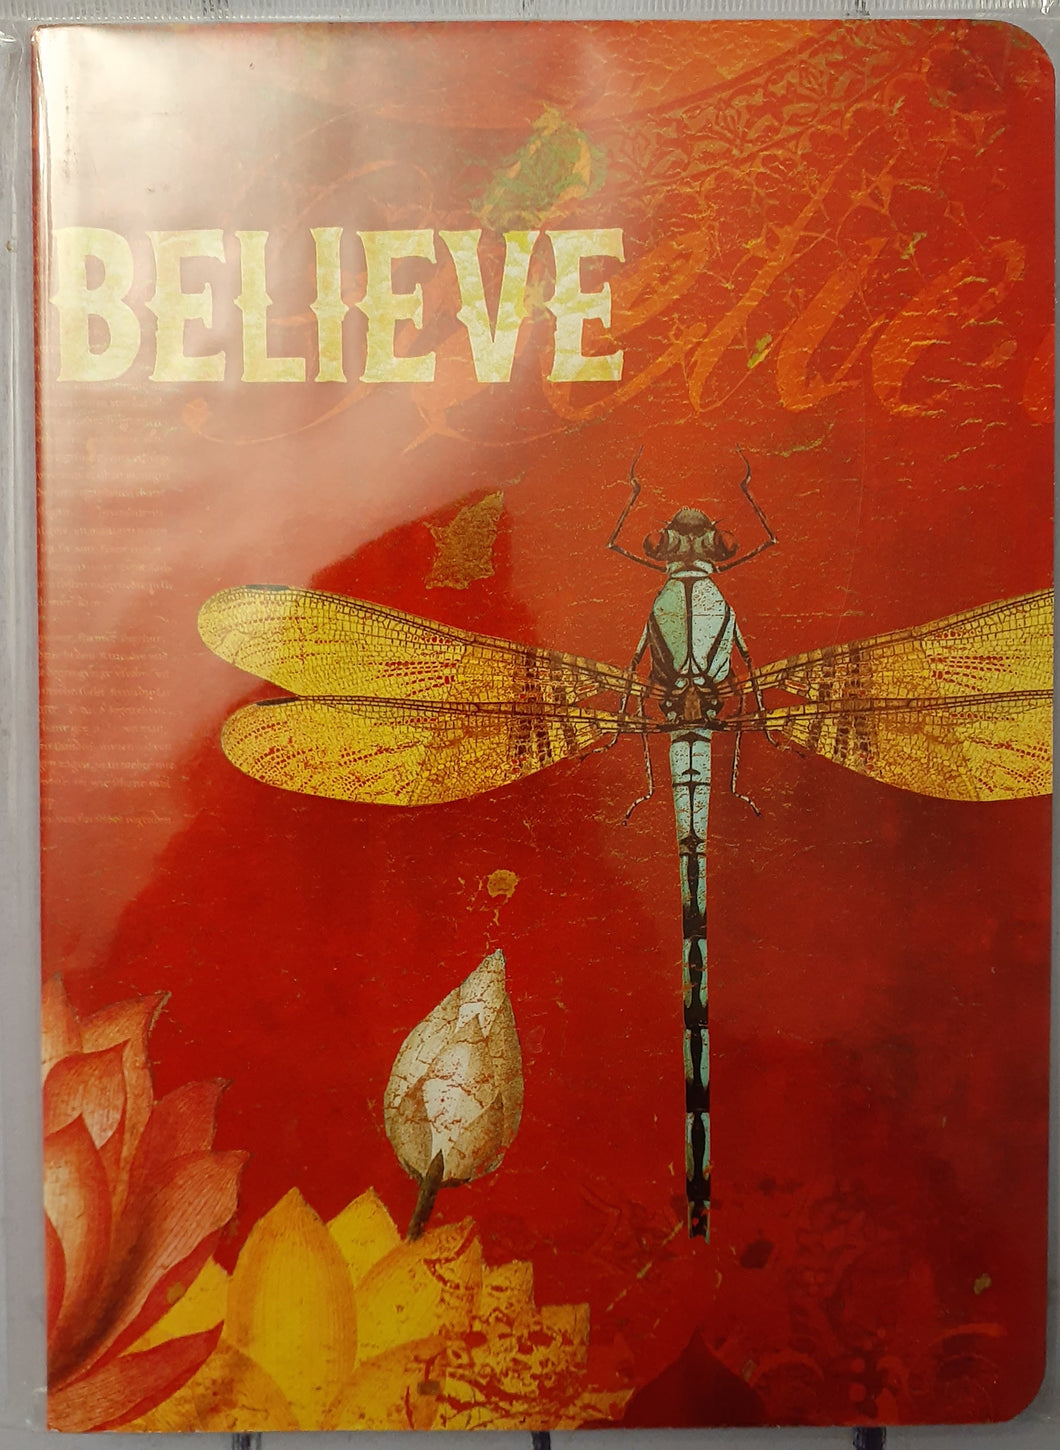 Dragonfly Journal